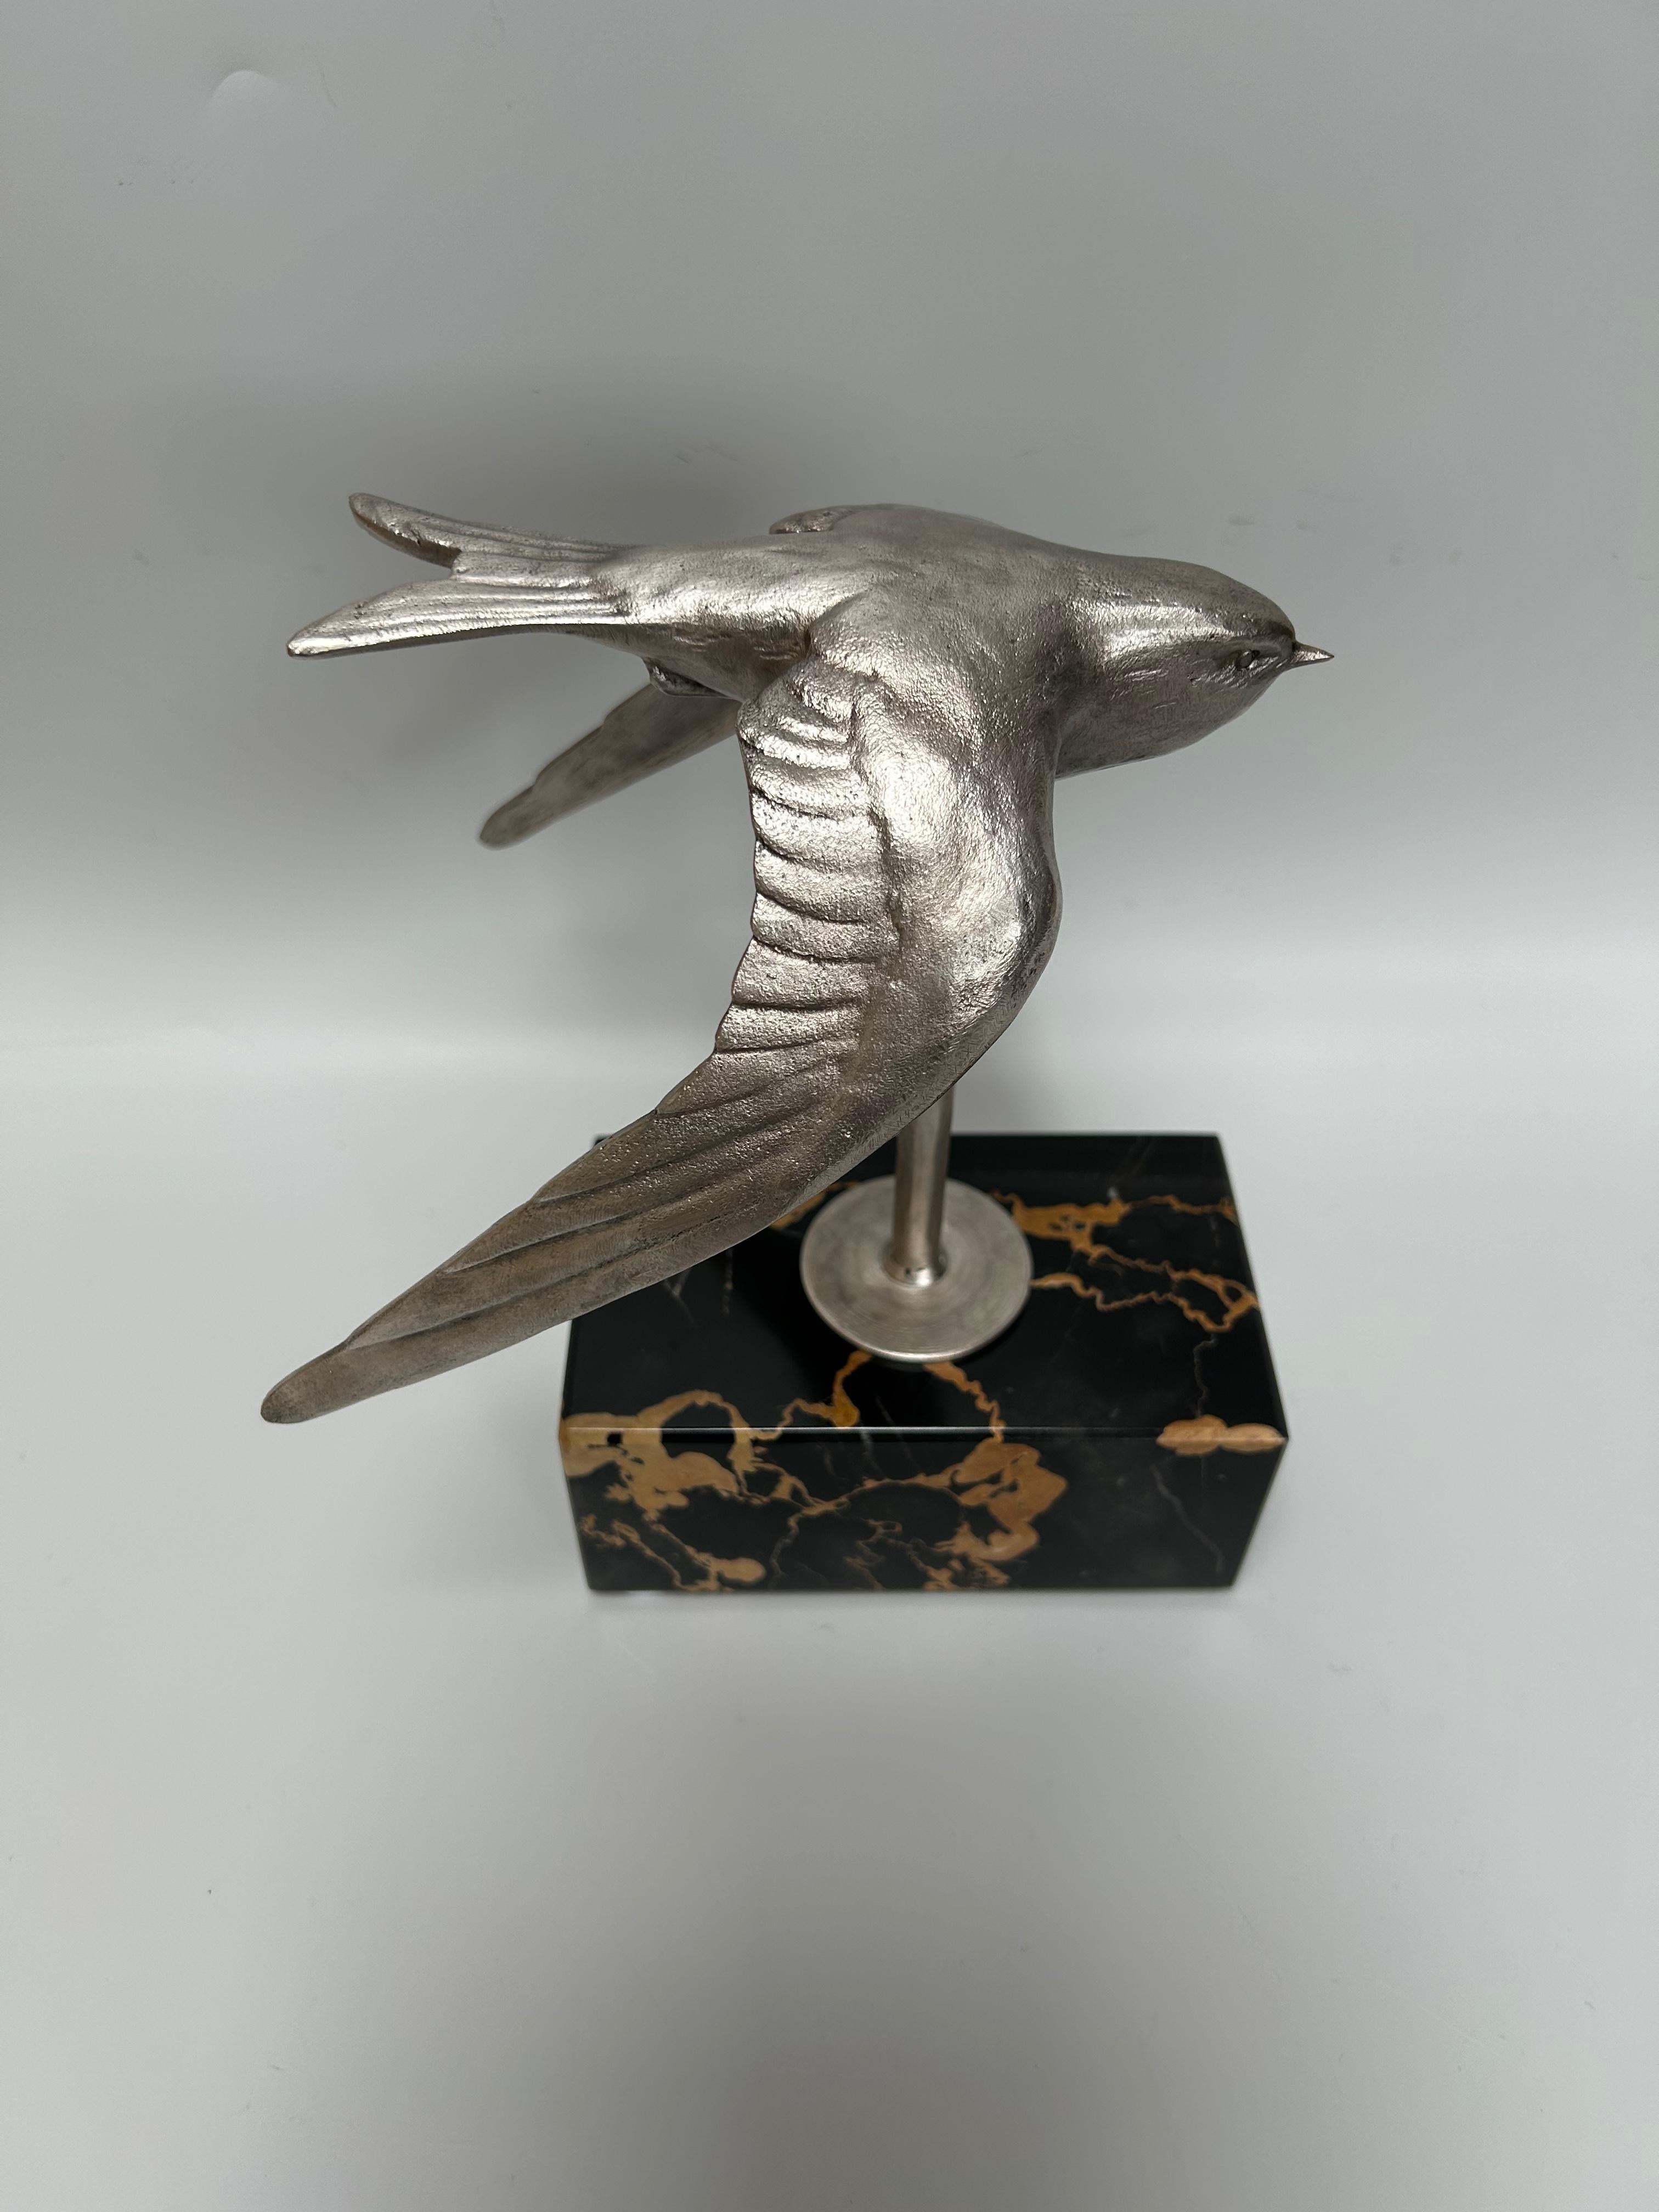 Art deco sculpture in silvered bronze the flight of the swallow signed Ruchot. 
On a portor marble base.
Iin perfect condition.

Length: 18 cm
Width: 15 cm
Height: 22,5 cm
Weight:2,7 Kg

Charles Ruchot, born April 16, 1871 in Paris where he died